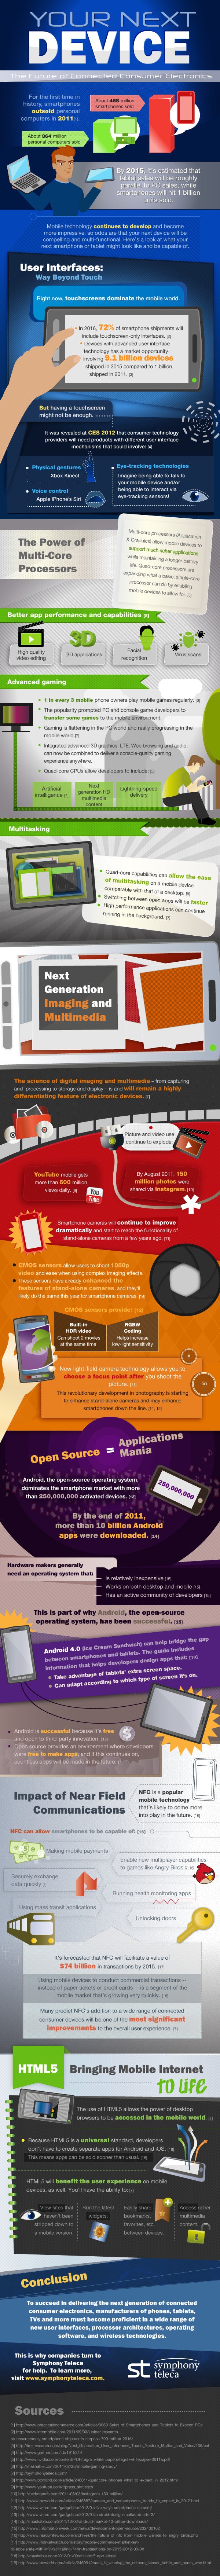 Every feature and technology your next phone will have, summed up into one infographic